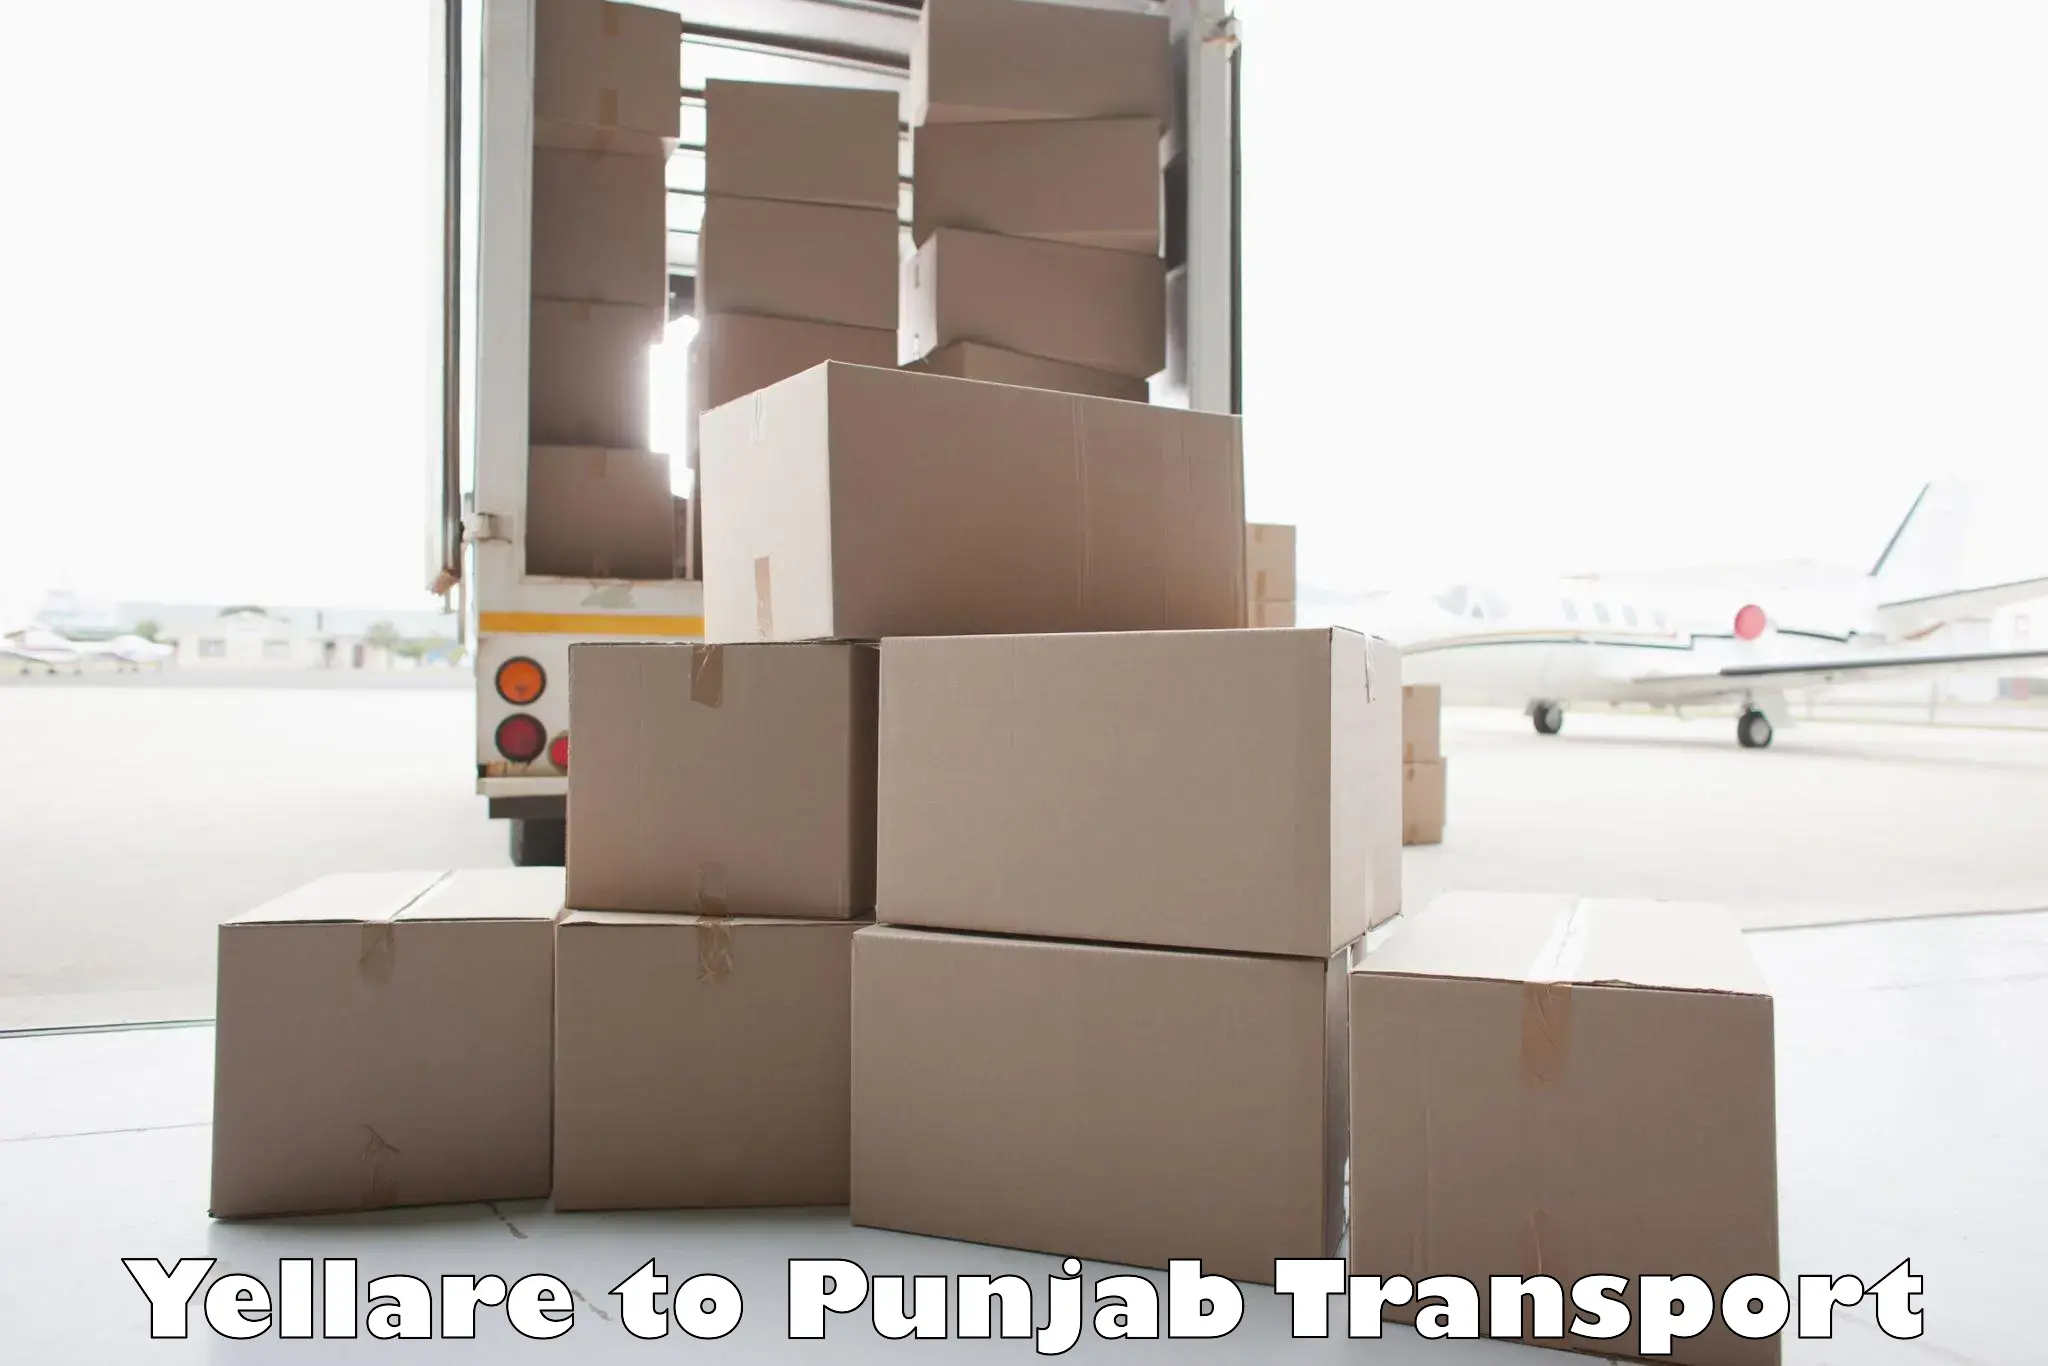 All India transport service Yellare to IIT Ropar